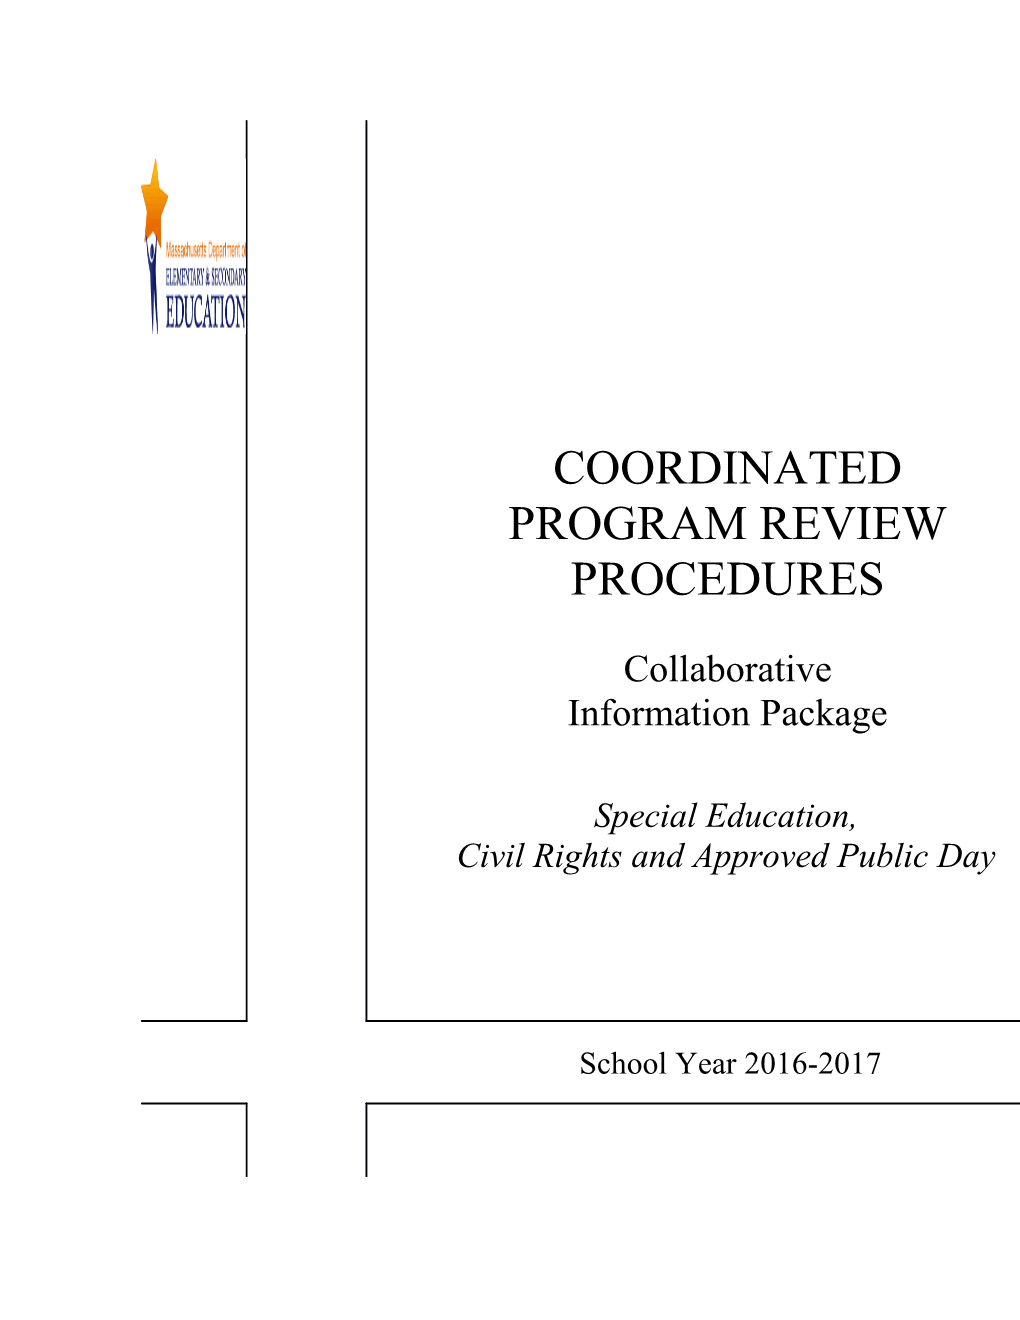 2016-2017 Collaborative Information Package